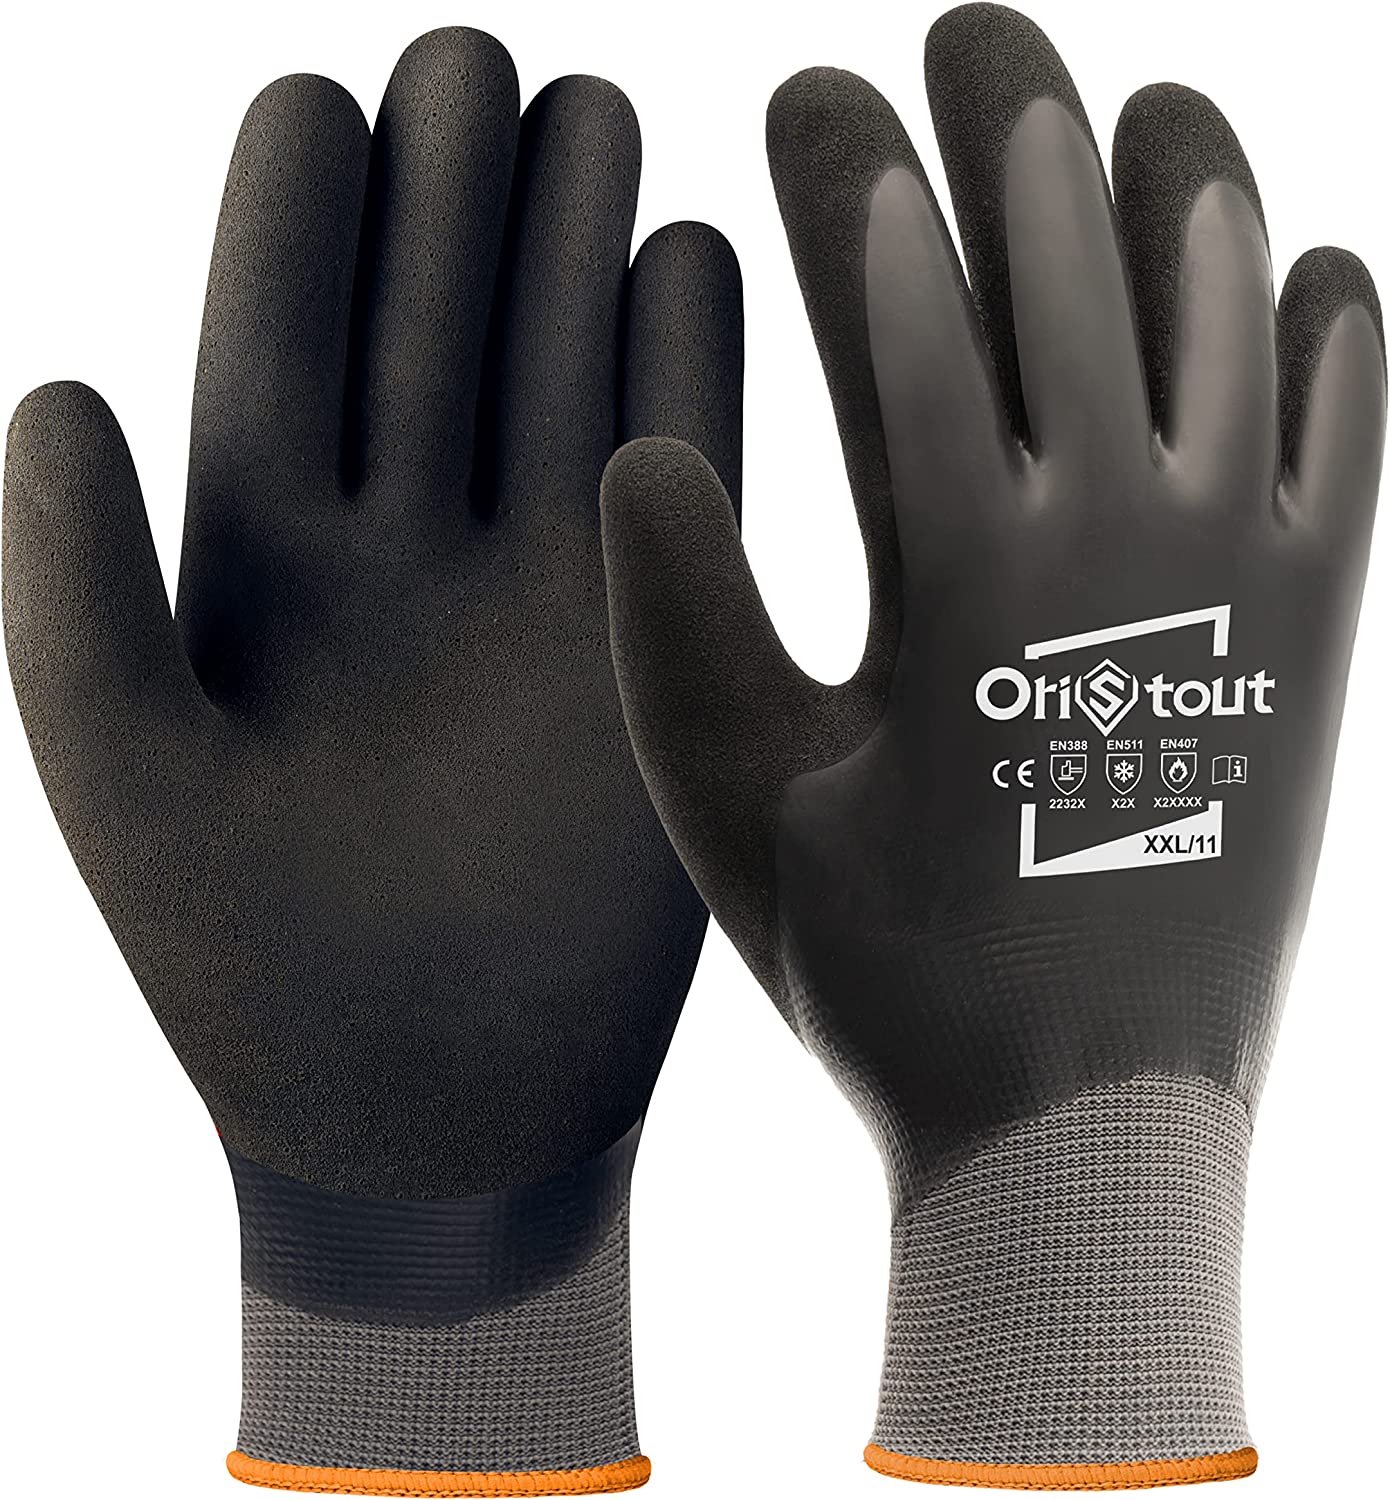 OriStout Waterproof Winter Work Gloves for Men and Women, Touchscreen, Freezer Gloves for Working in Freezer, Thermal Insulated, Metal